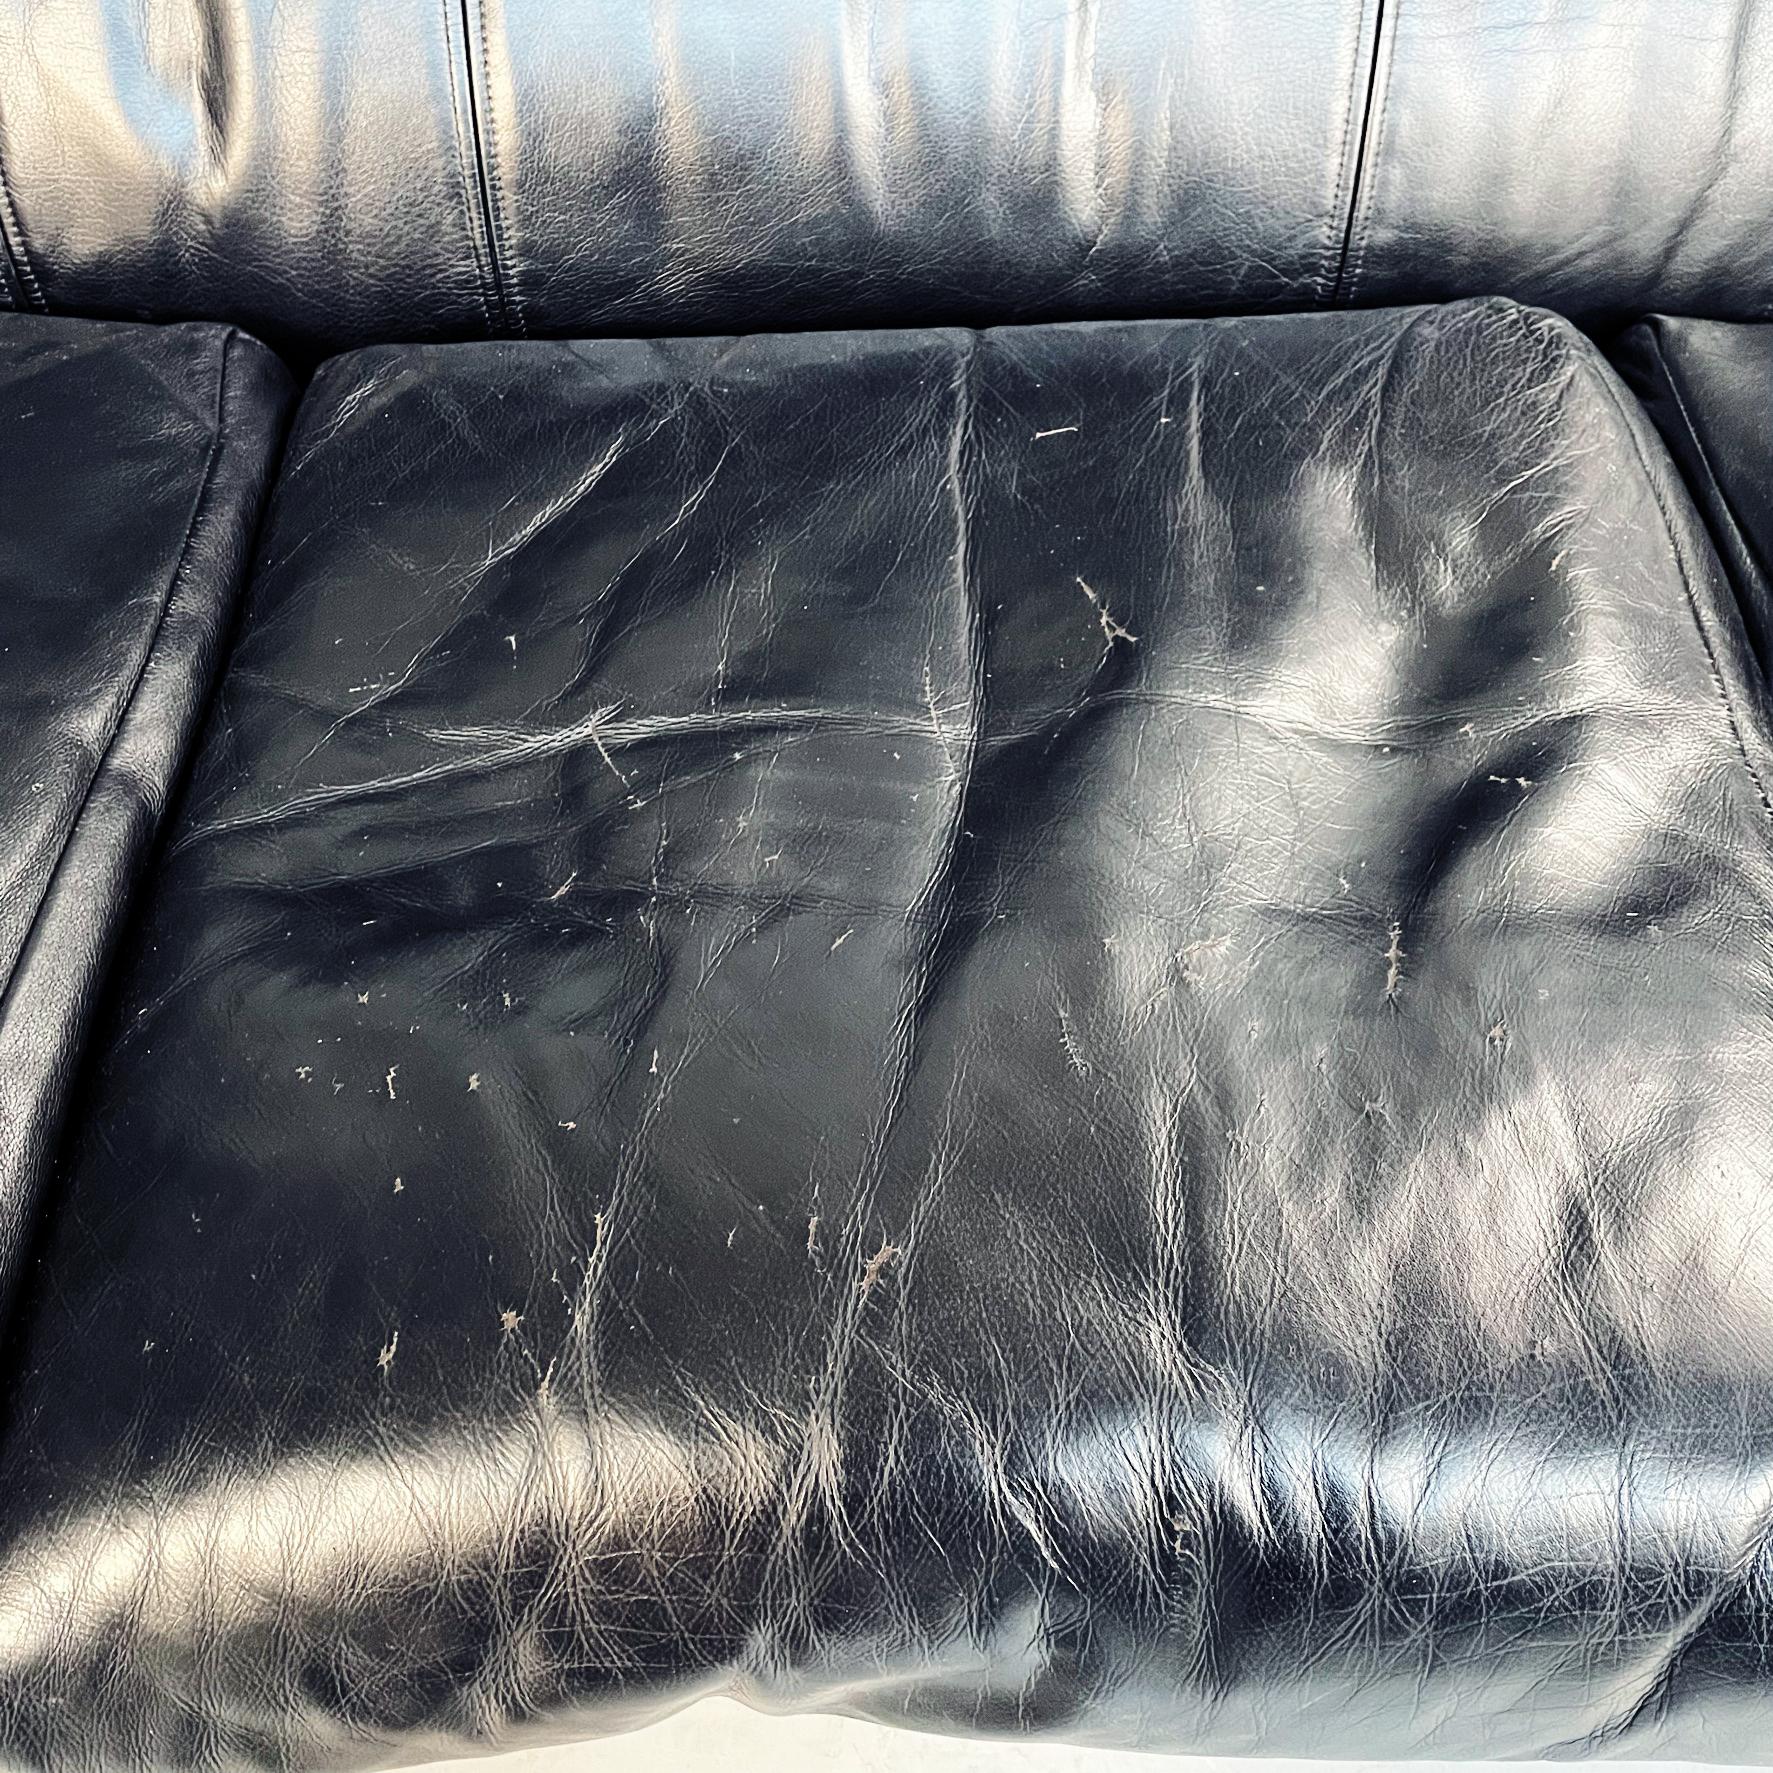 Italian Modern Black Leather Wood 3seat Sofa Bull by Frattini for Cassina, 1980s For Sale 5